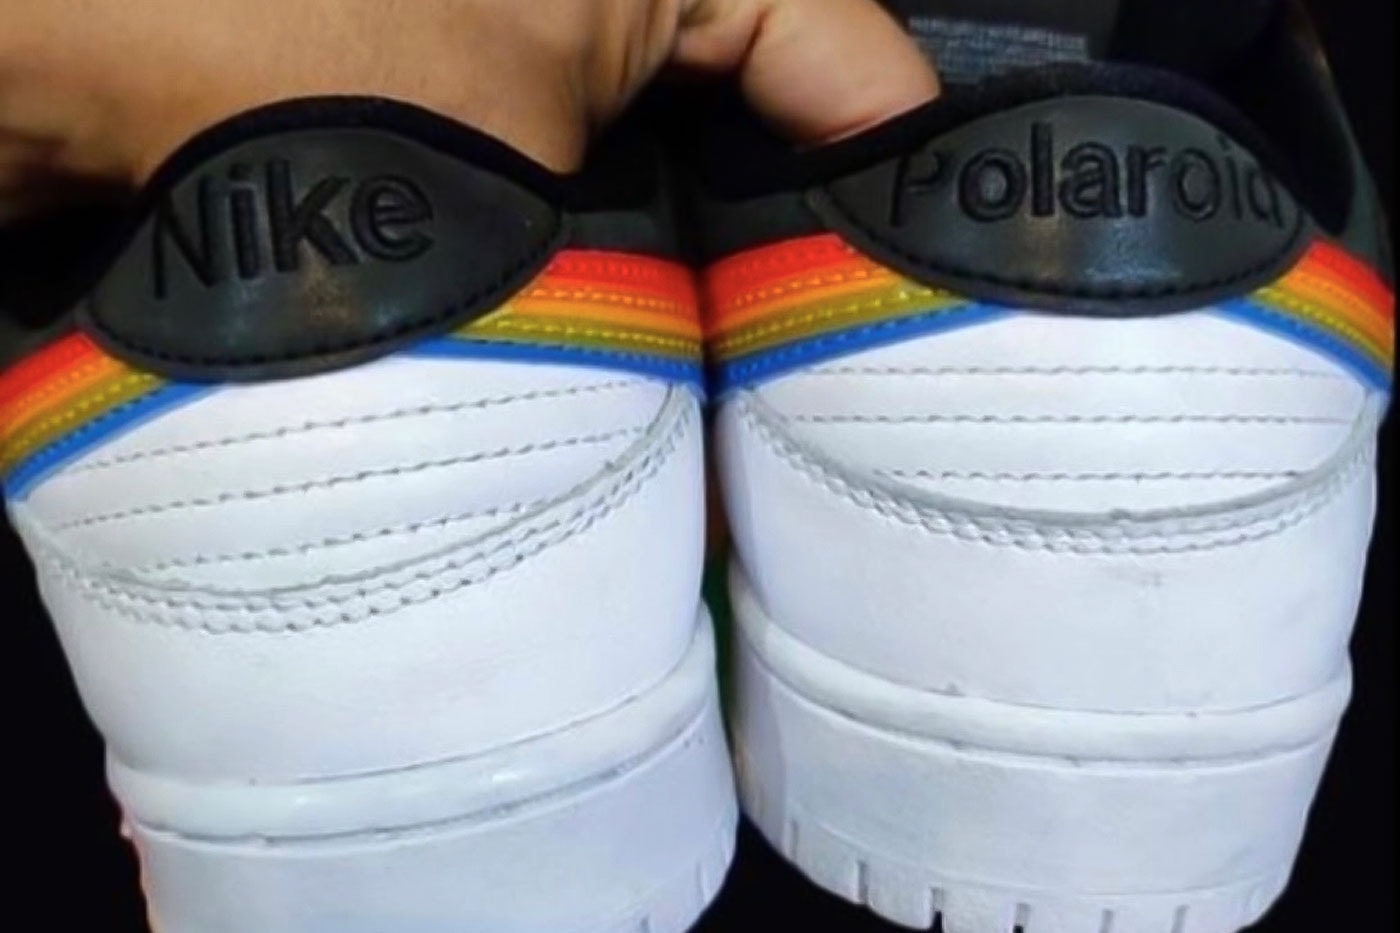 Polaroid Nike SB Dunk Low First Look Release Info Date Buy Price 